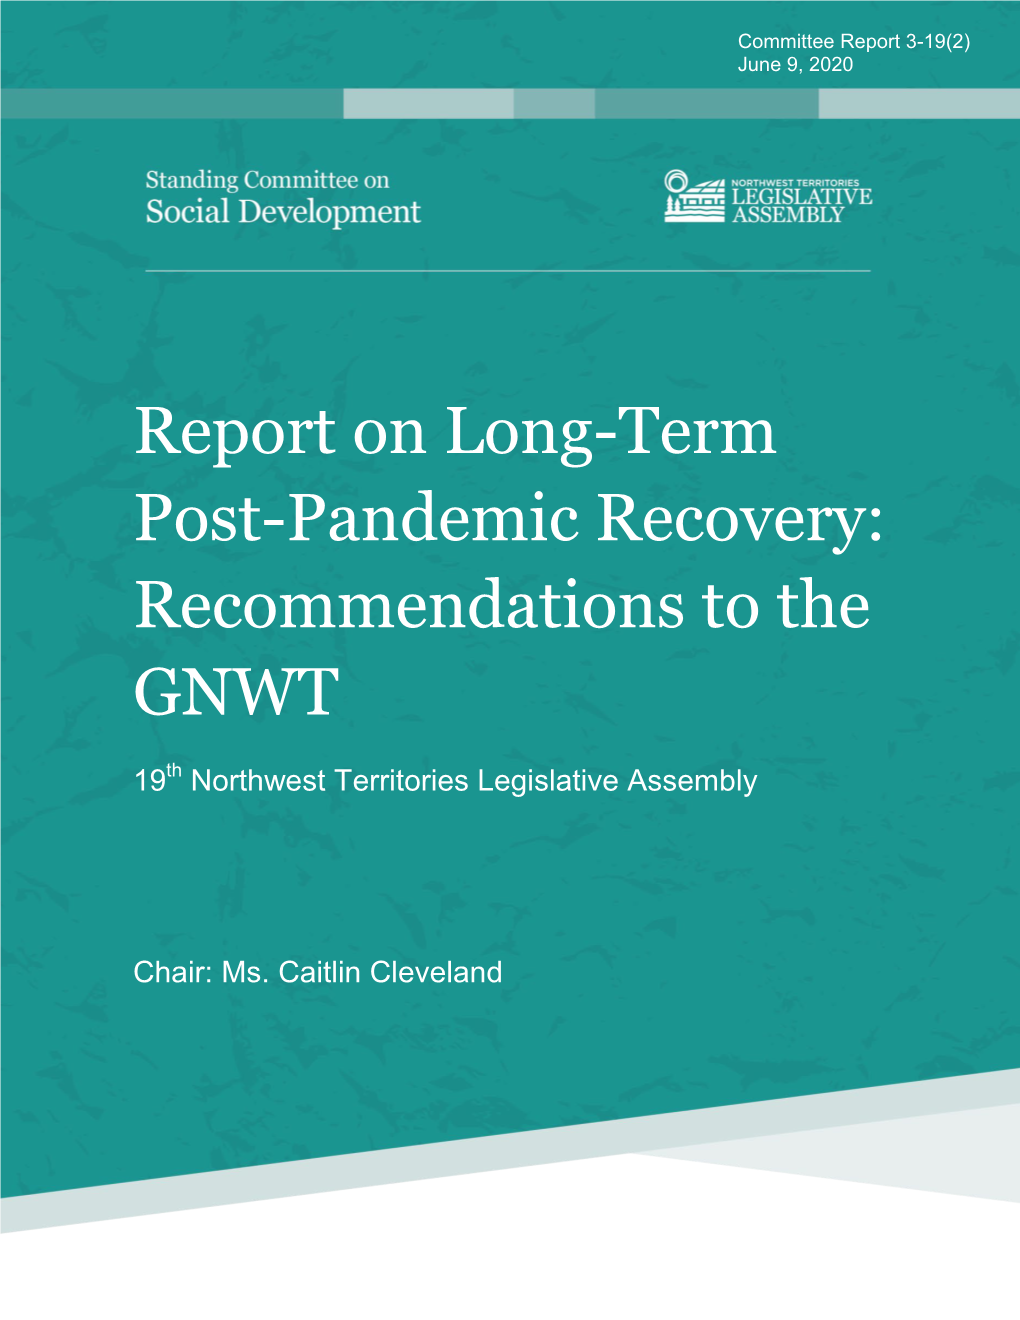 Report on Long-Term Post-Pandemic Recovery: Recommendations to the GNWT